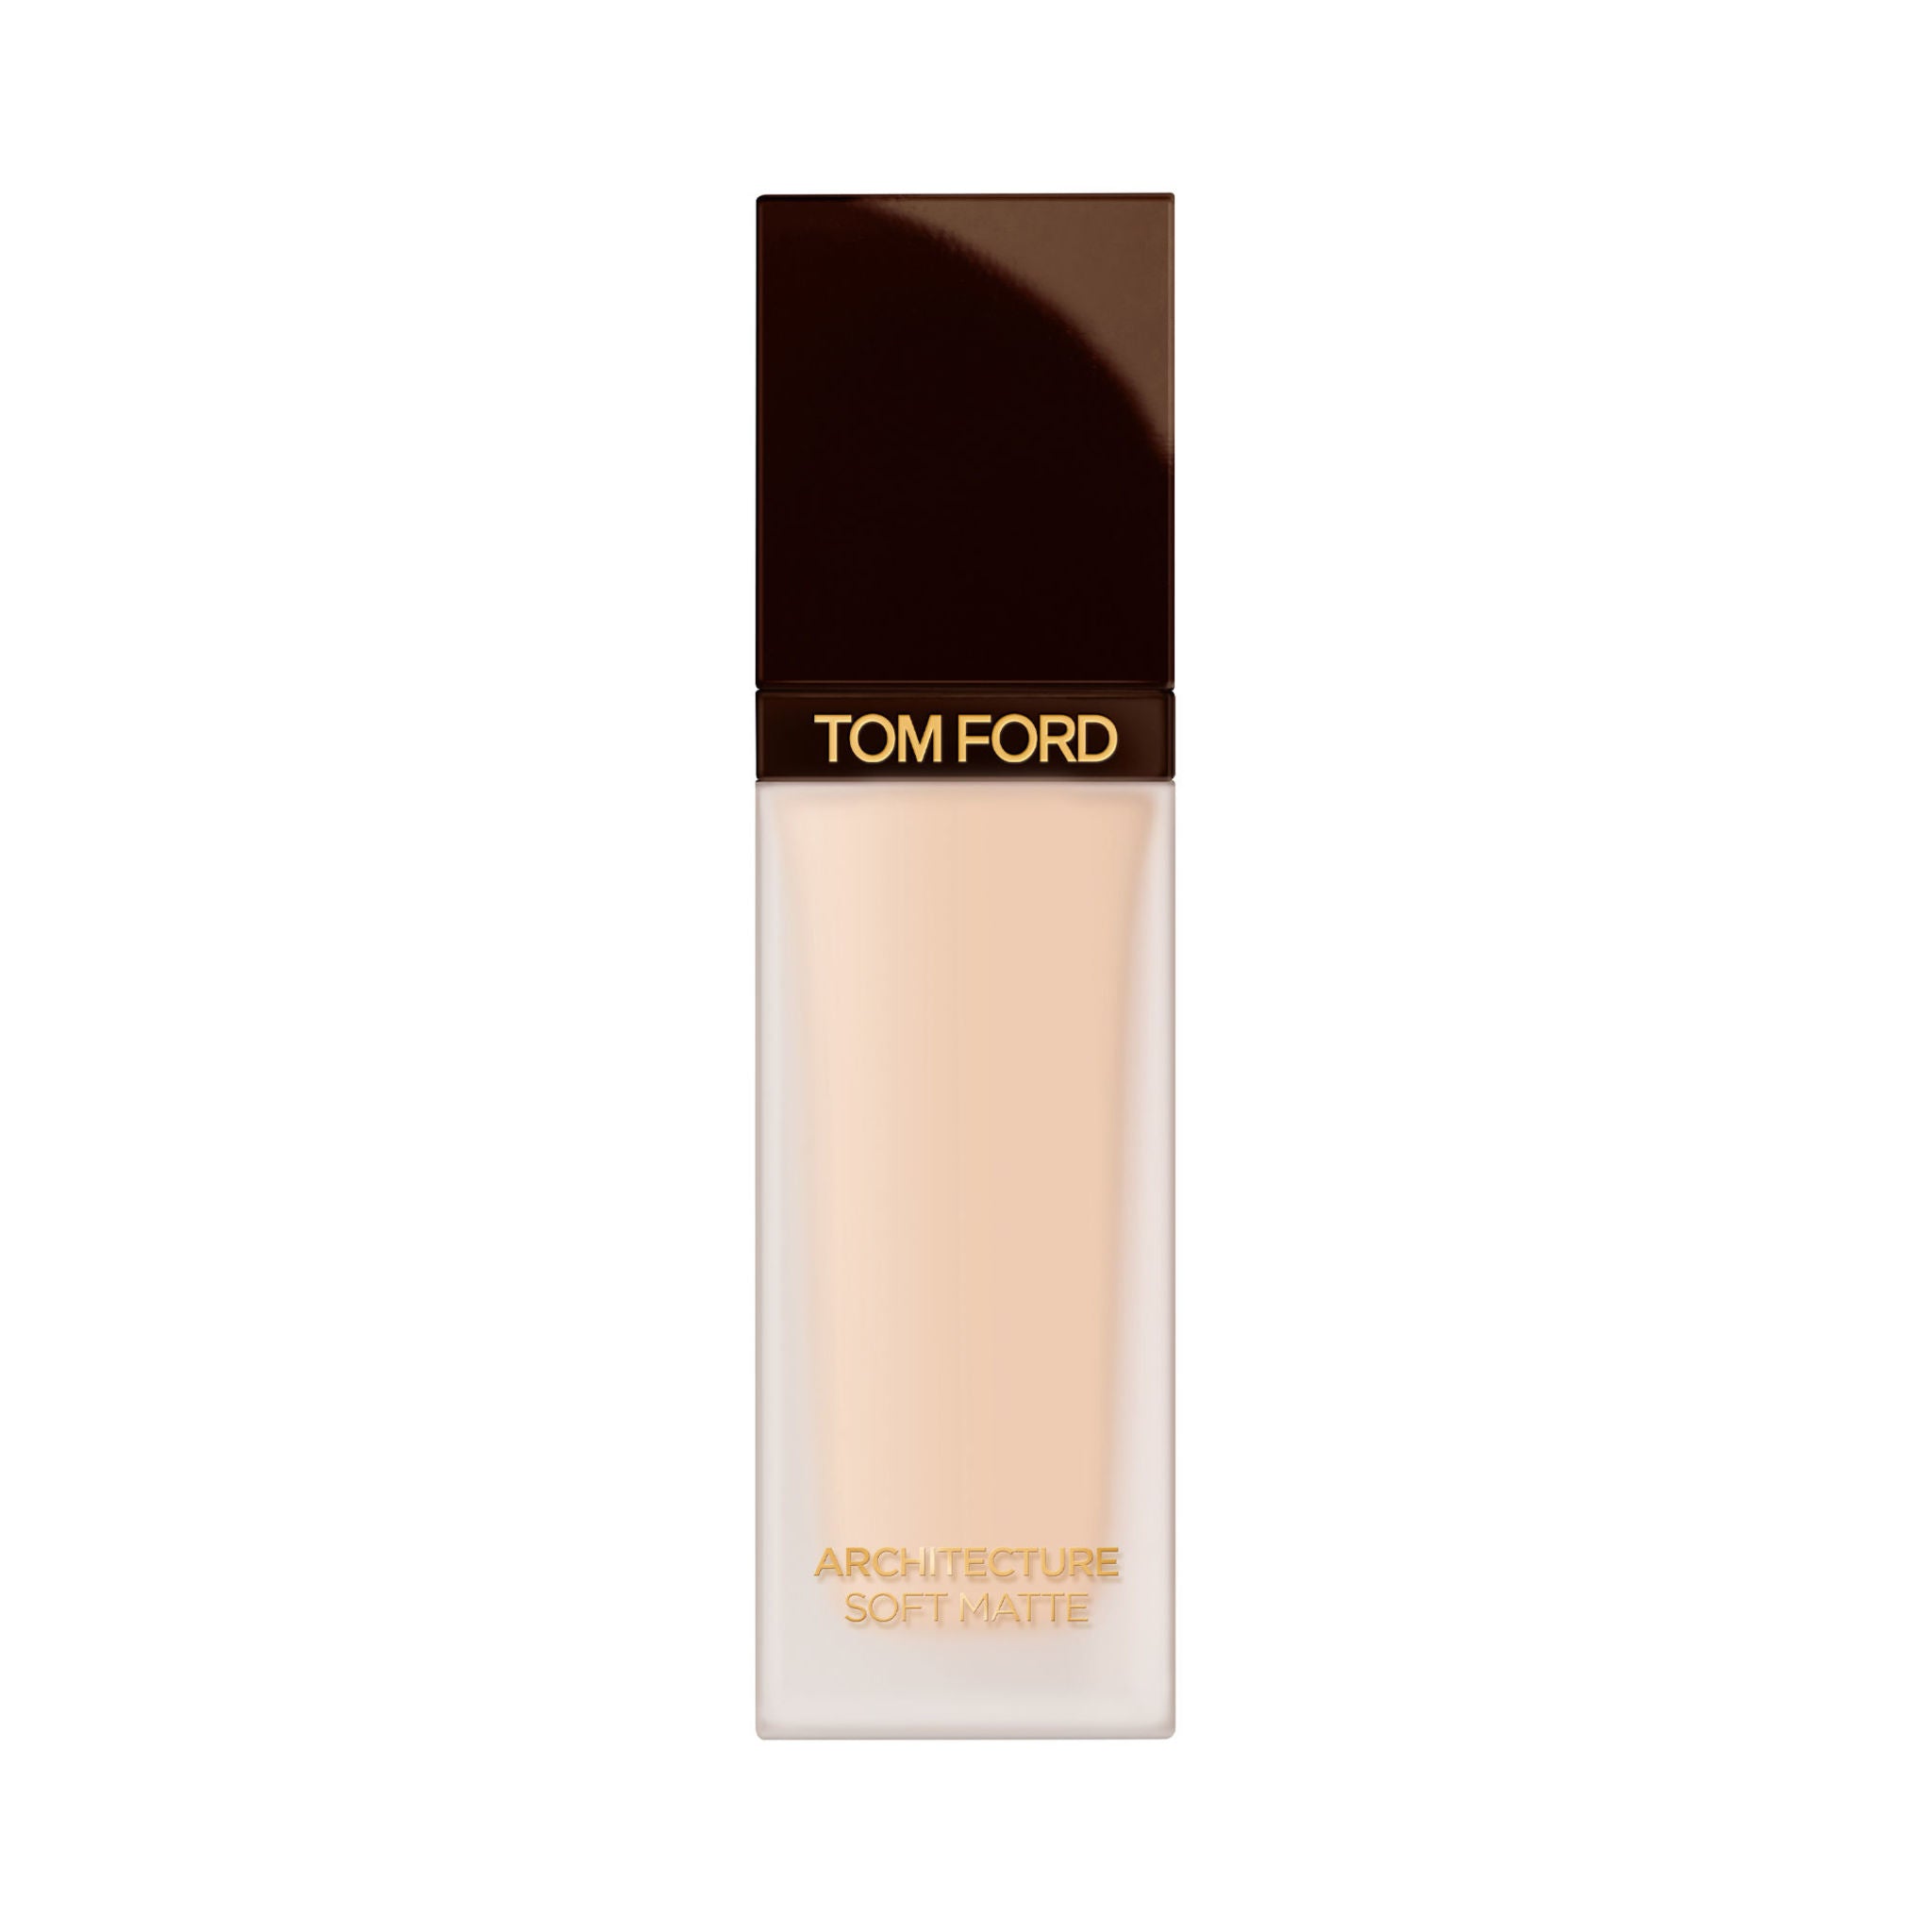 Tom Ford Architecture Soft Matte Blurring Foundation Color/Shade variant: Pearl main image. This product is for light complexions